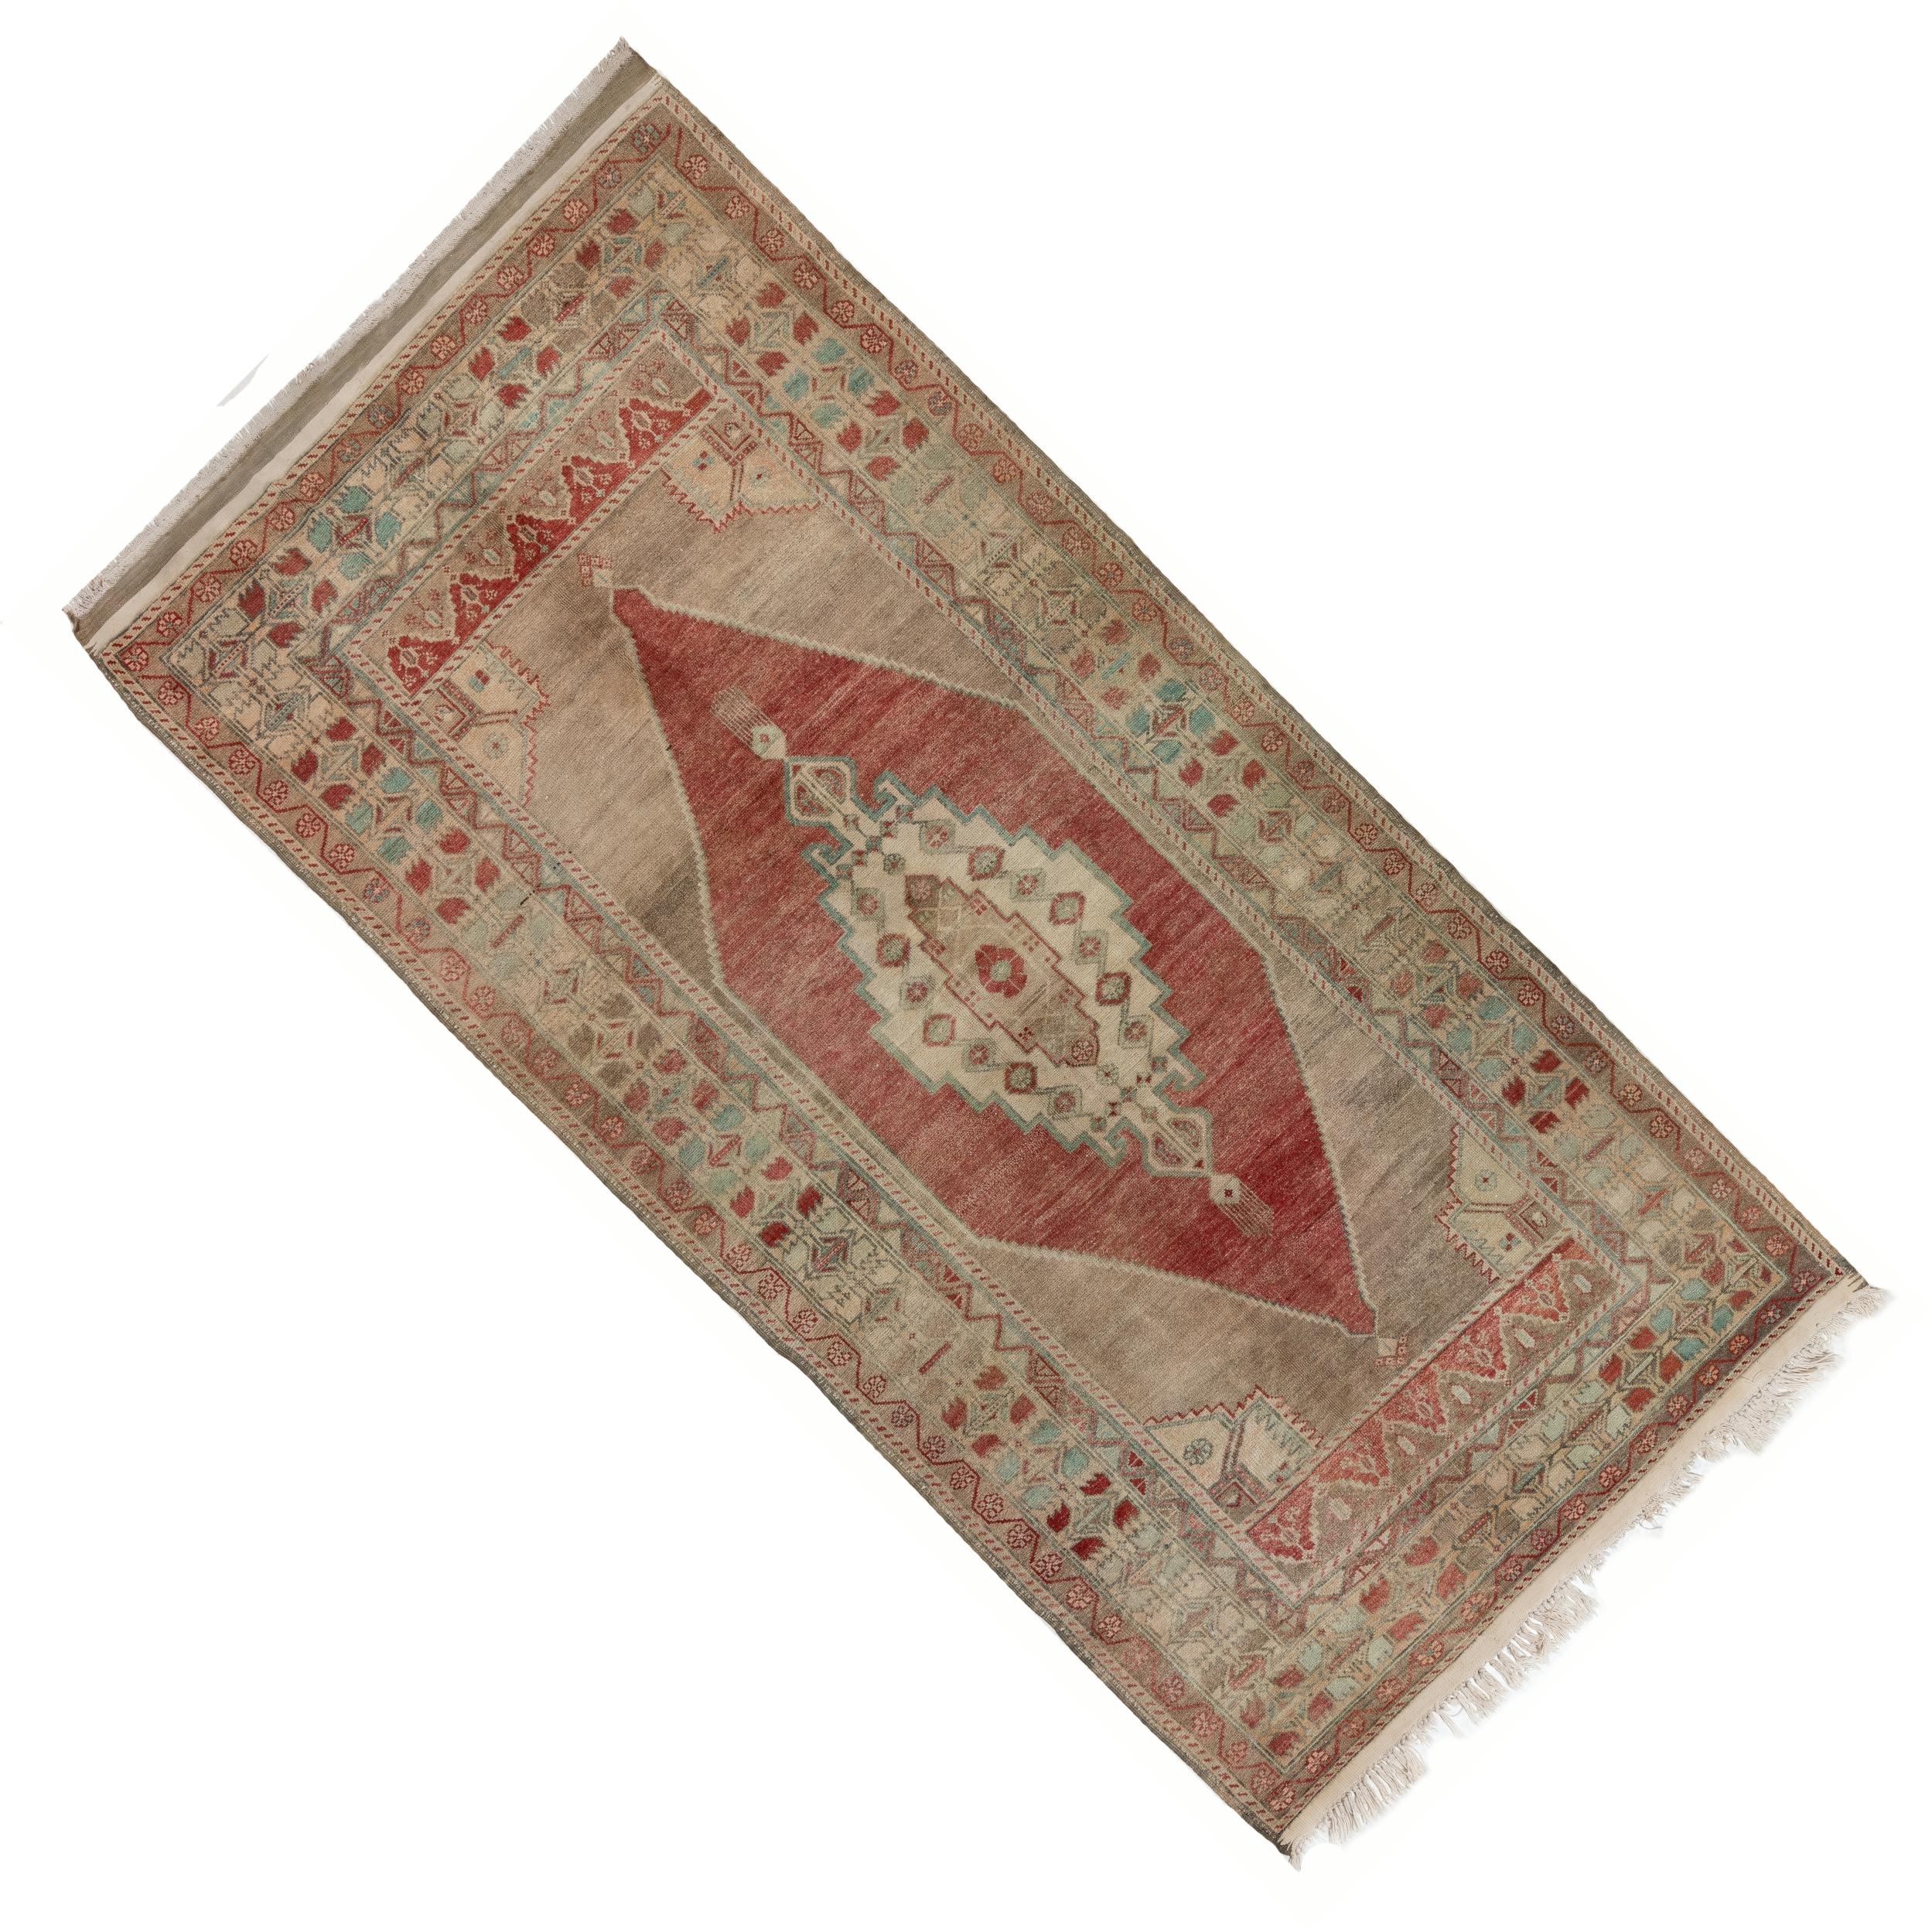 20th Century 5x9.8 Ft Vintage Hand-Knotted Turkish Wool Area Rug with Tribal Style, Ca 1960 For Sale